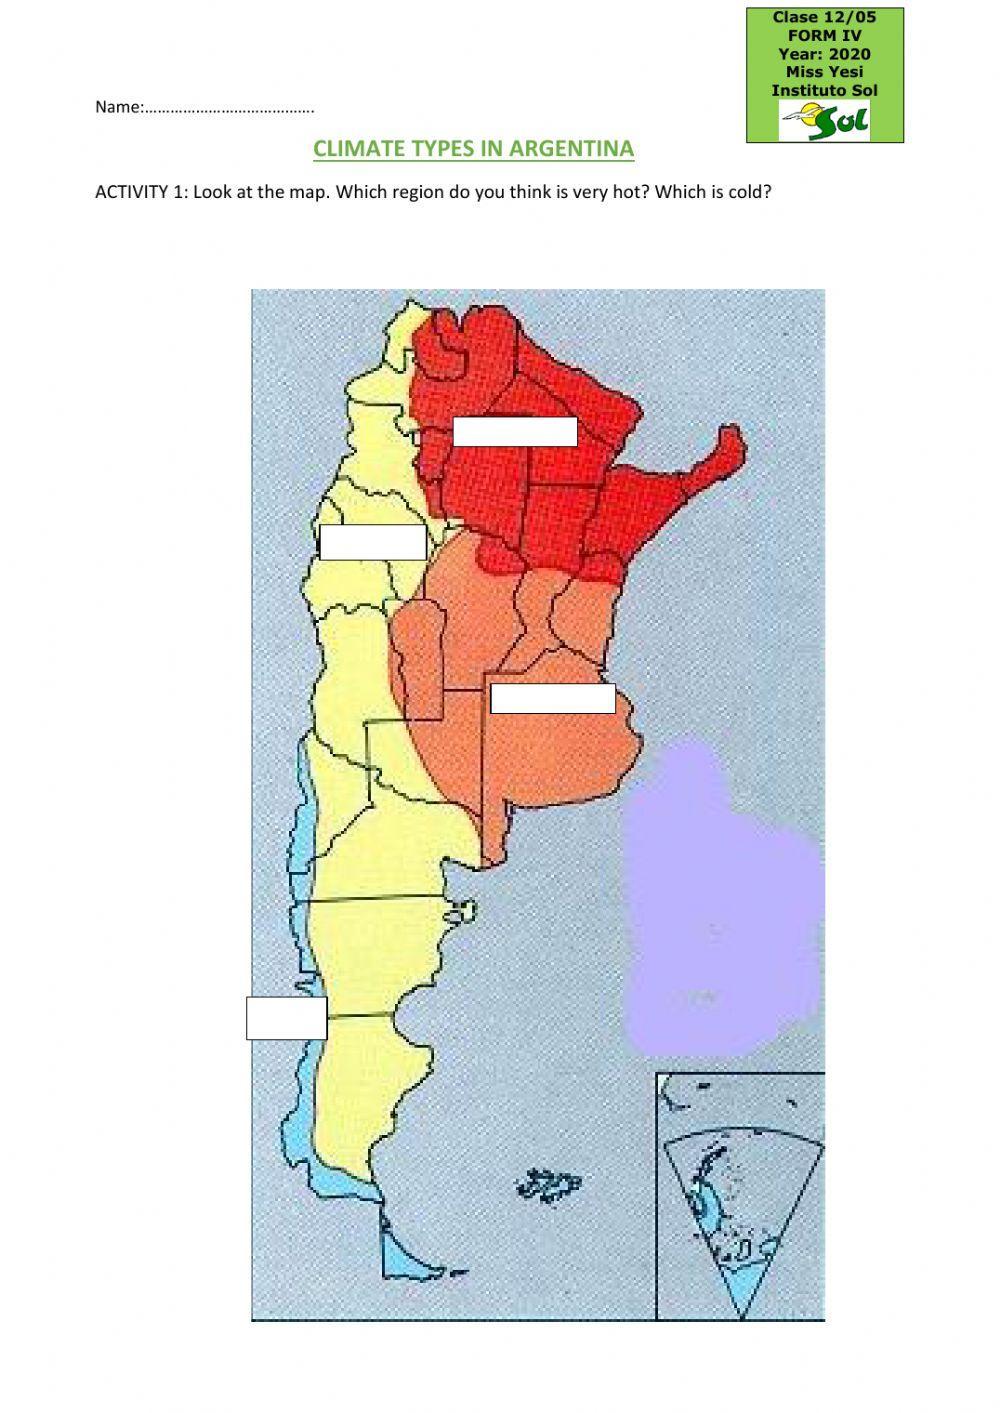 Climate types in Argentina